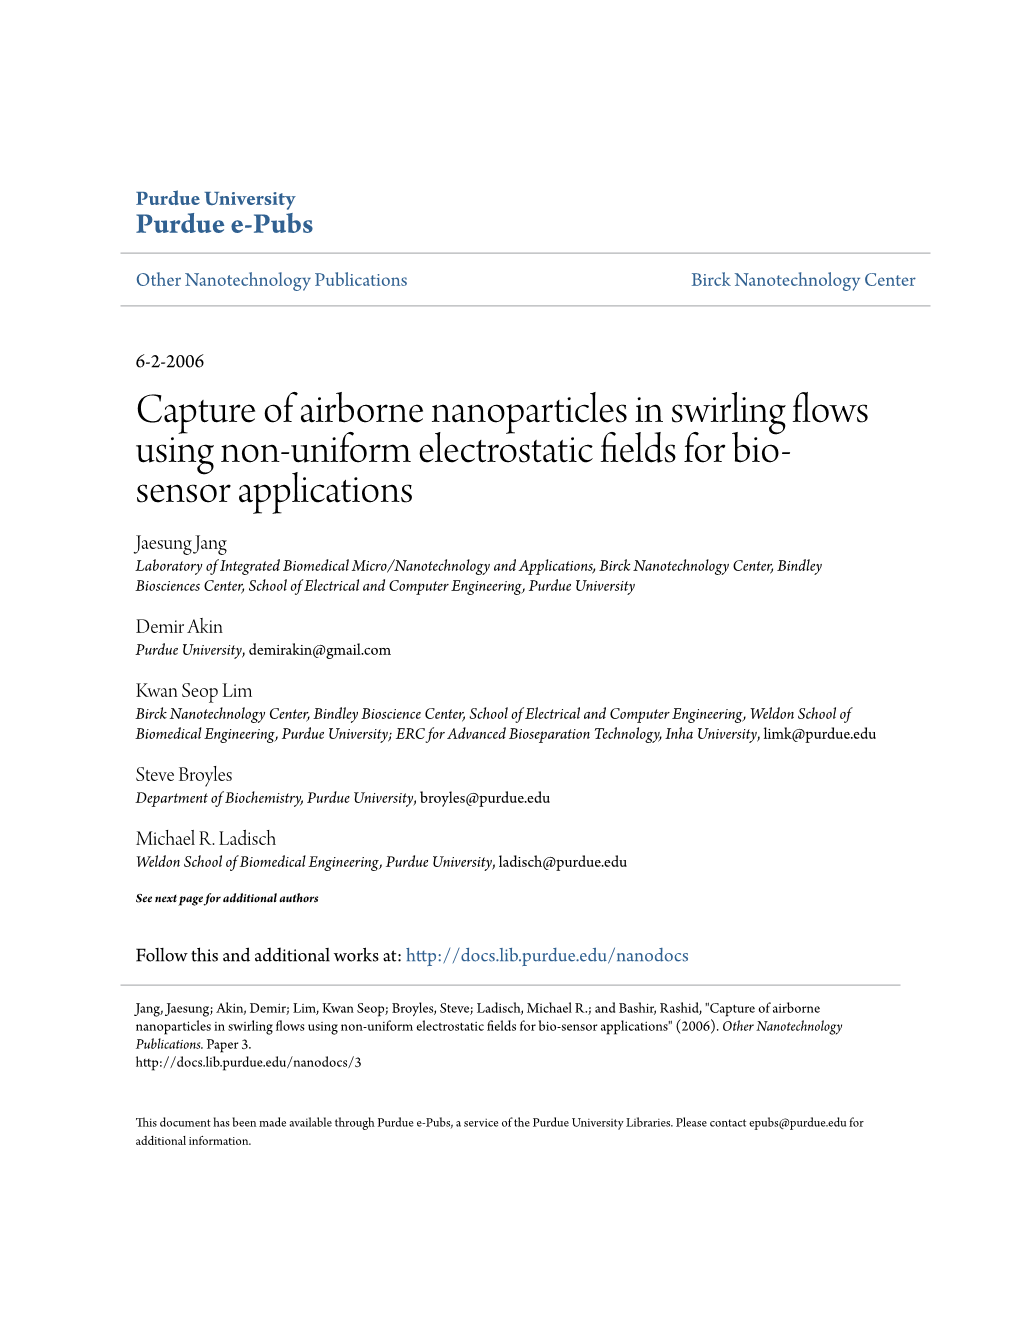 Capture of Airborne Nanoparticles in Swirling Flows Using Non-Uniform